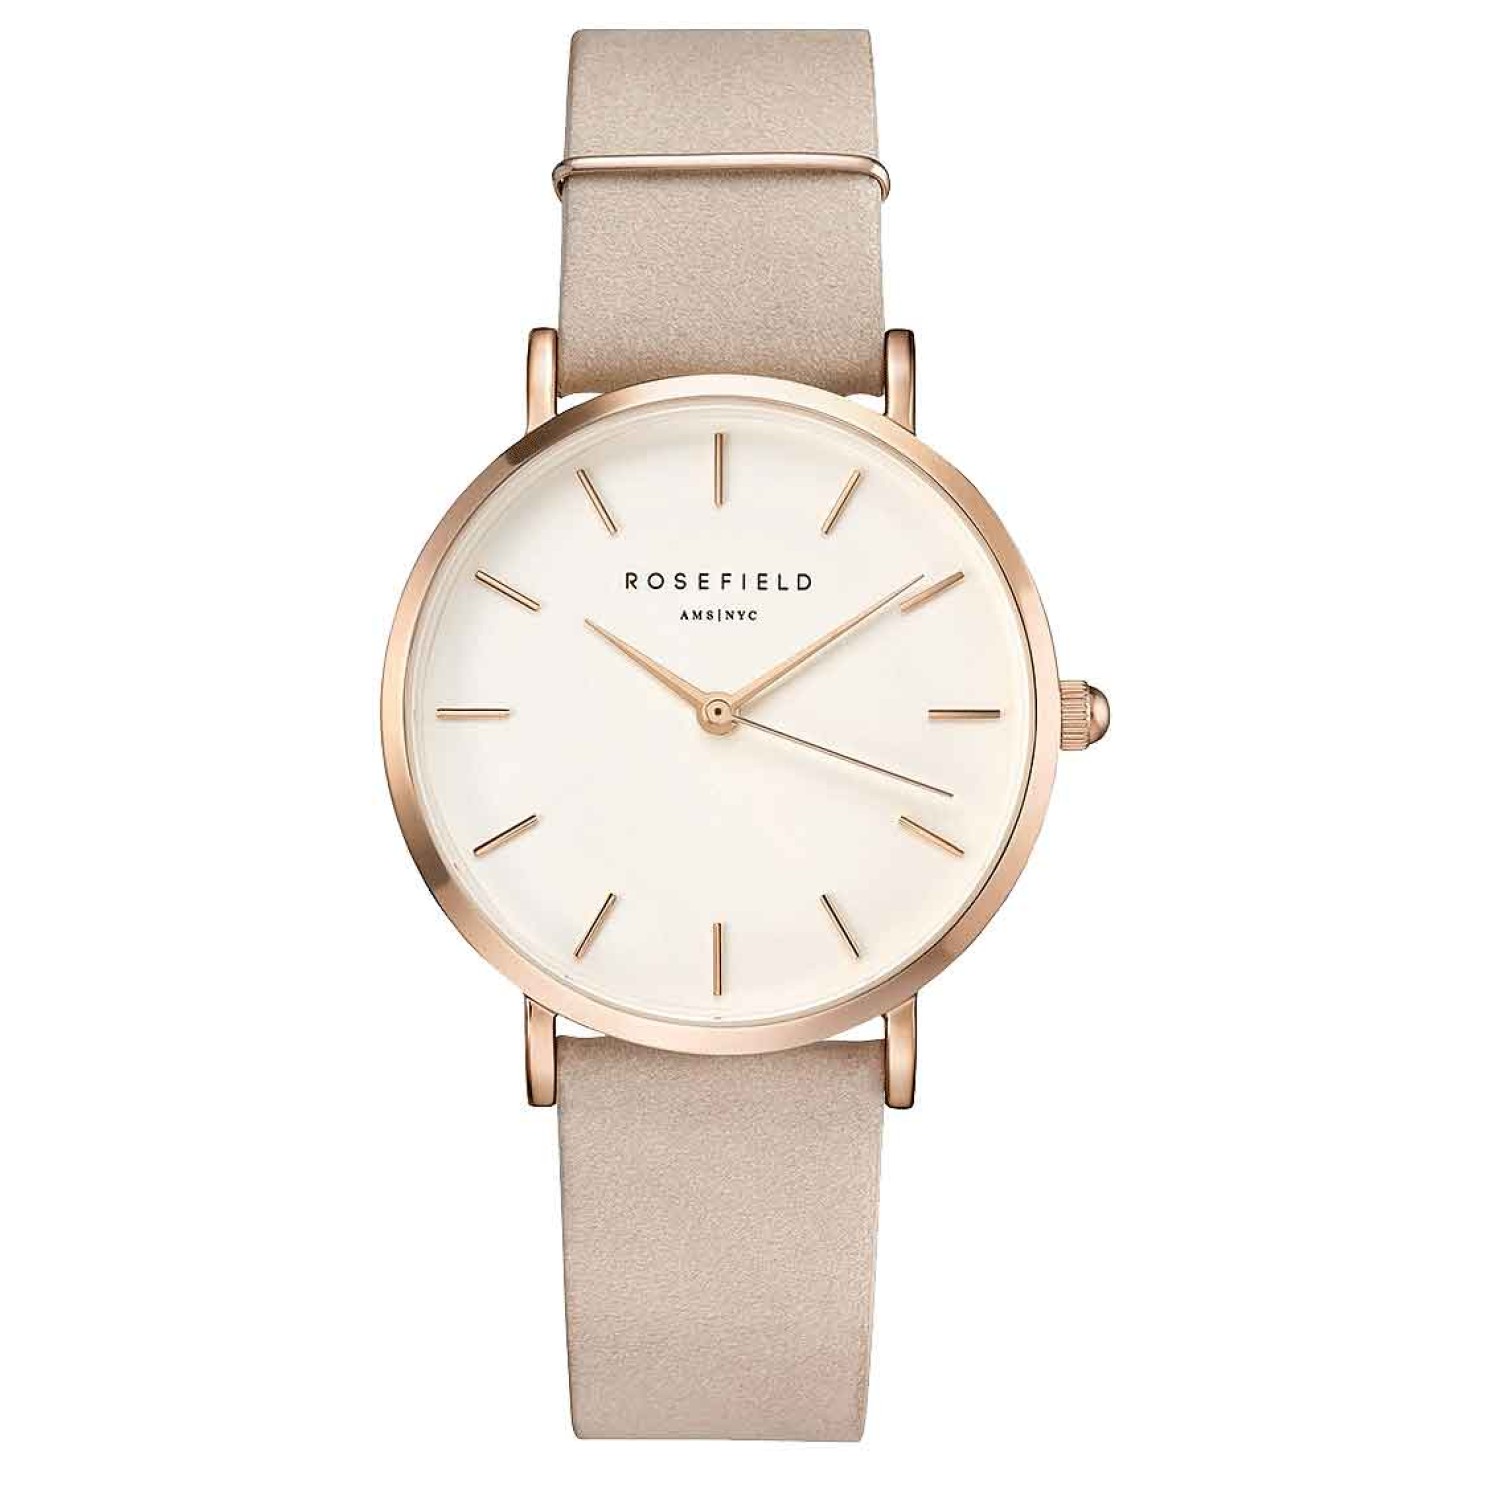 WSPR-W73 Rosefield Gold WEST VILLAGE Soft Pink Watch. The WEST VILLAGE: The iconic and traditionally rebellious neighborhood of the West Village – a nonchalant area with European flair – is the inspiration behind this collection. The watch has a slender c